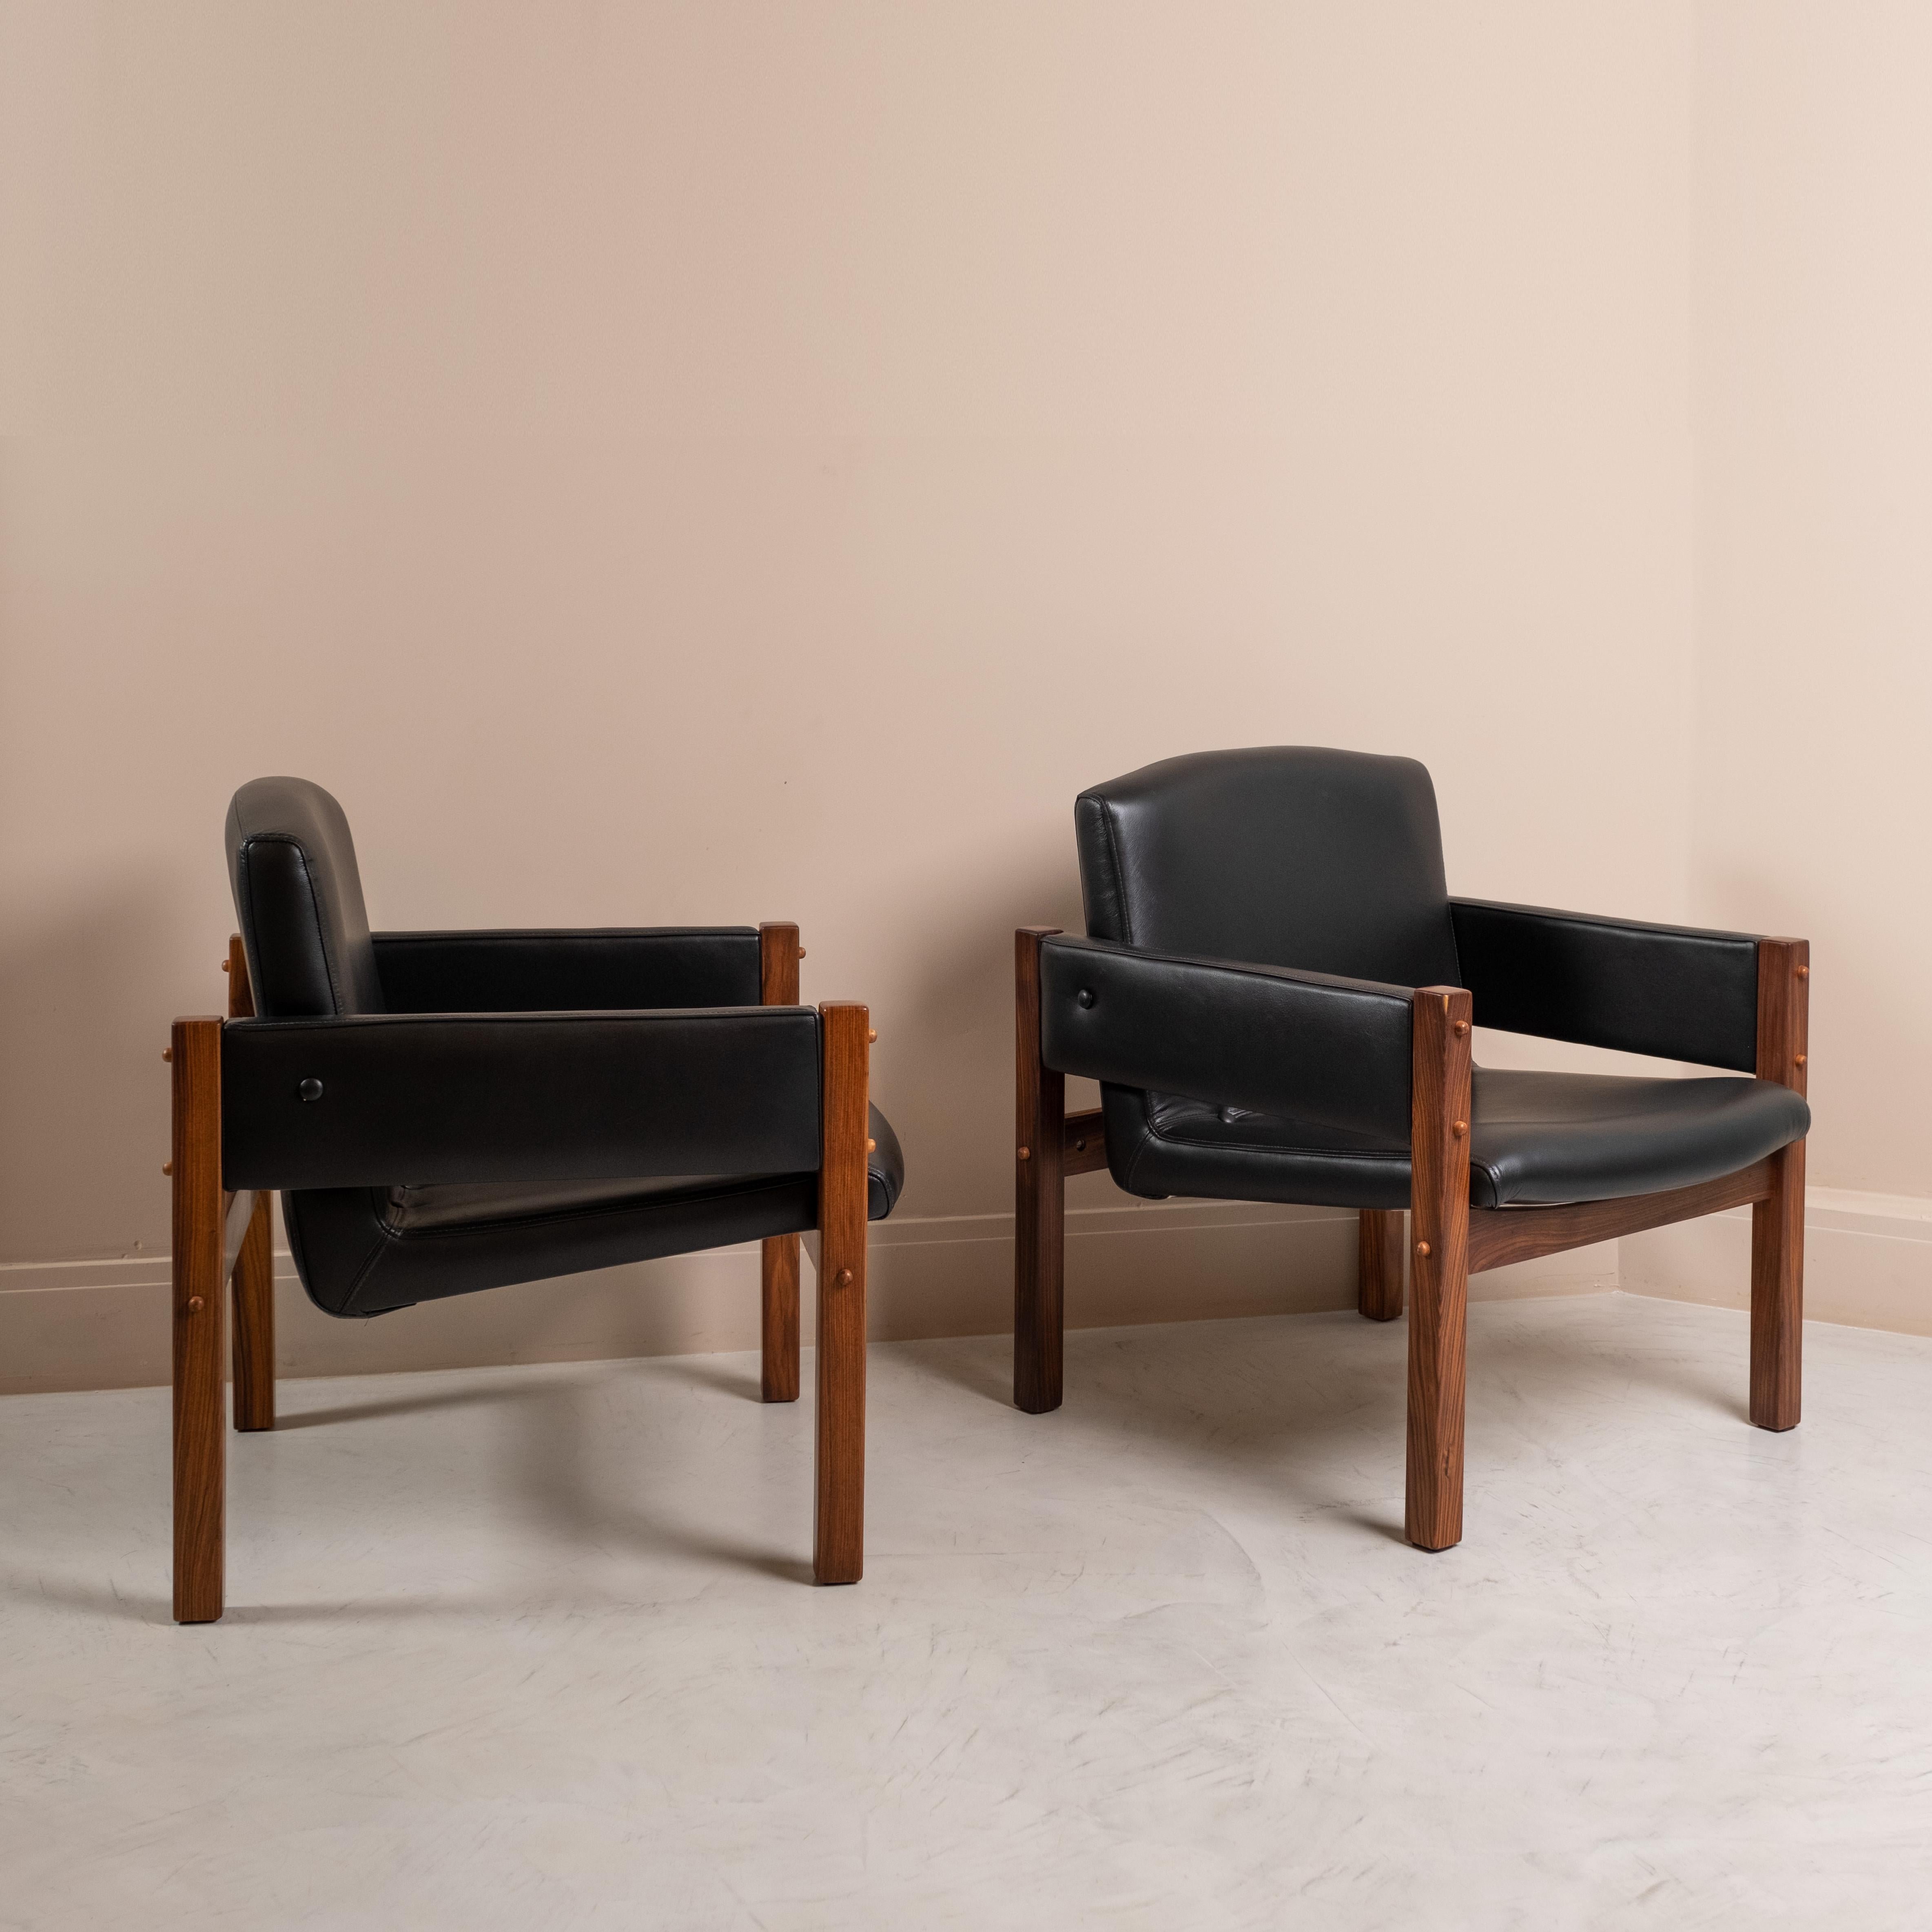 Amazing pair of Arcos  armchairs designed by Sergio Rodrigues in the 1960s for Itamaraty Palace.
They are composed by a solid rosewood structure. The seat and backrest are made up of a single piece.
Pieces entirely restored and covered in black